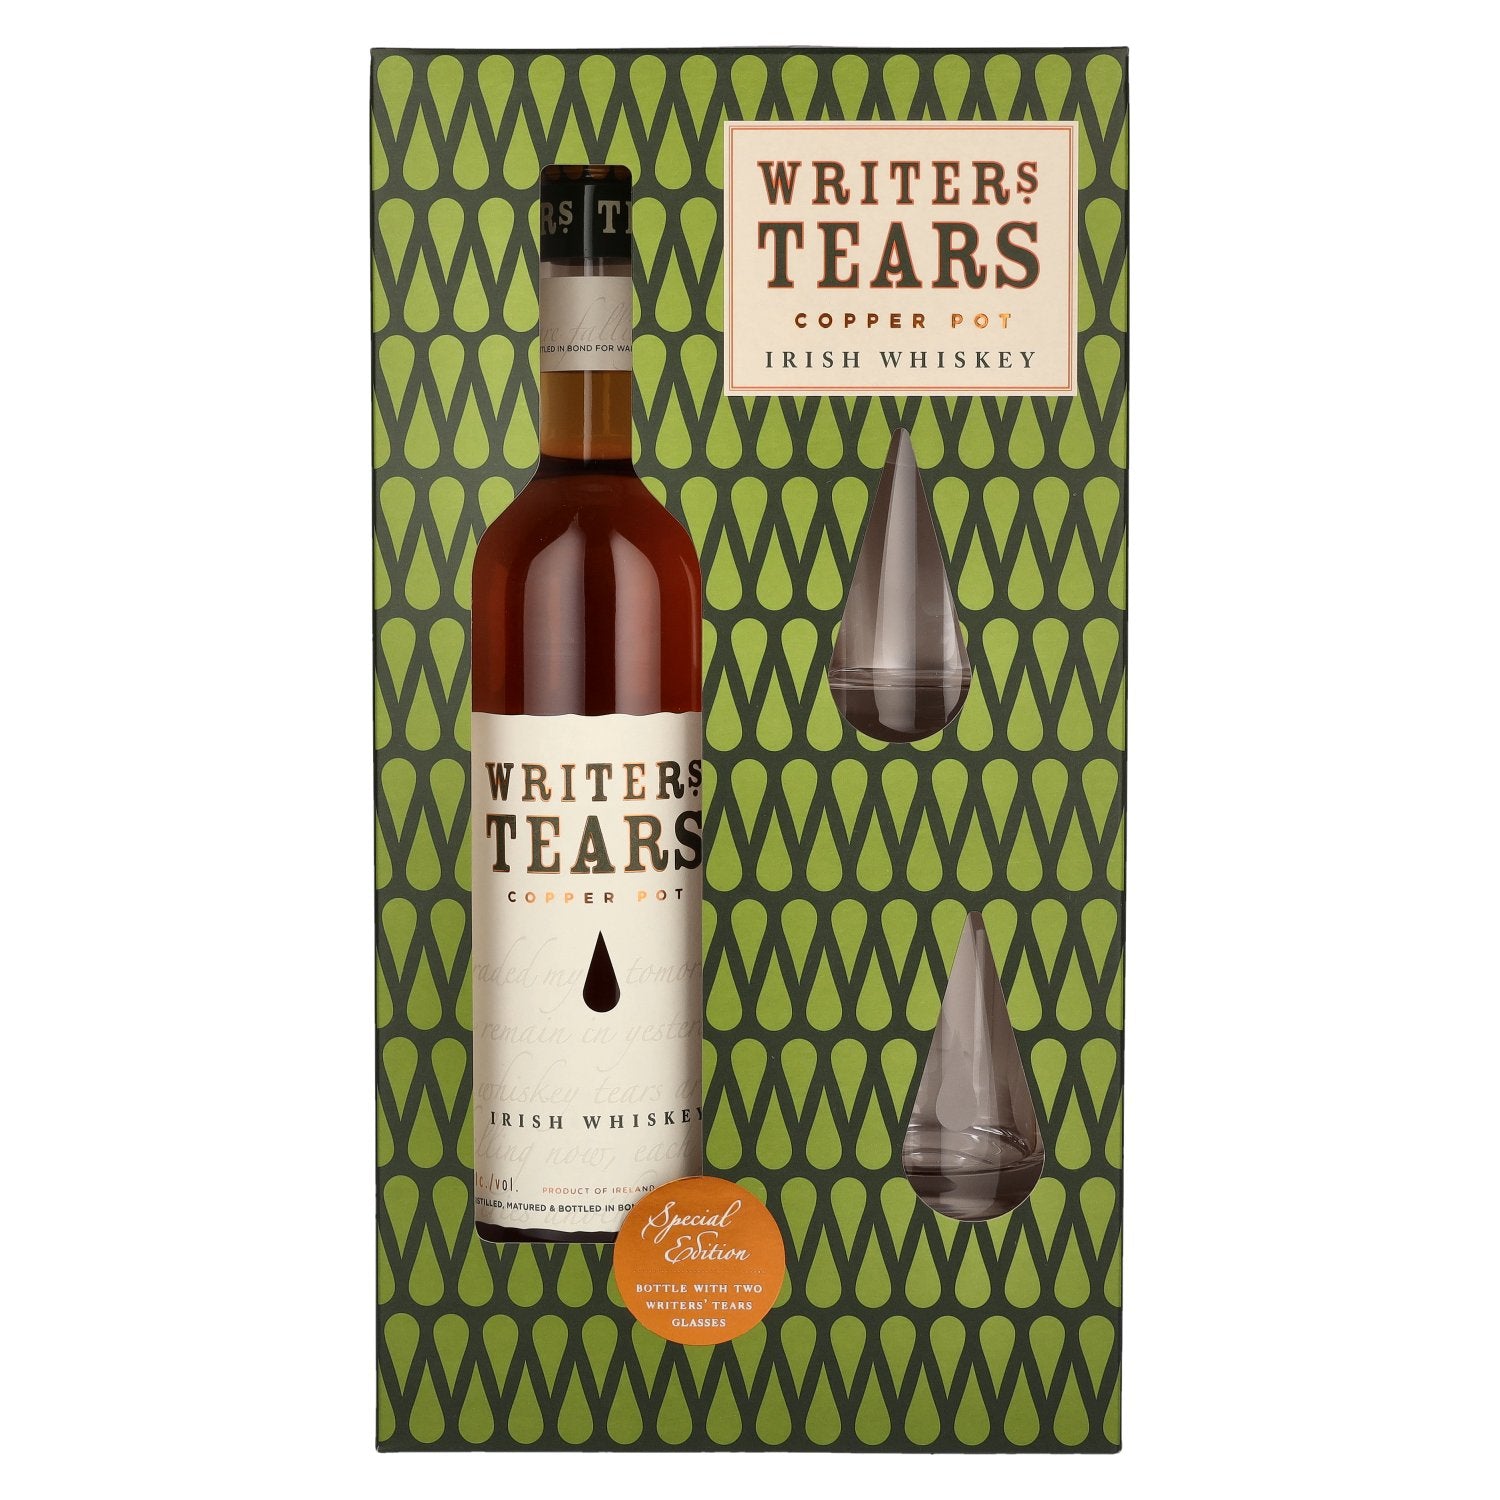 Writer's Tears COPPER POT Irish Whiskey 40% Vol. 0,7l in Giftbox with 2 glasses